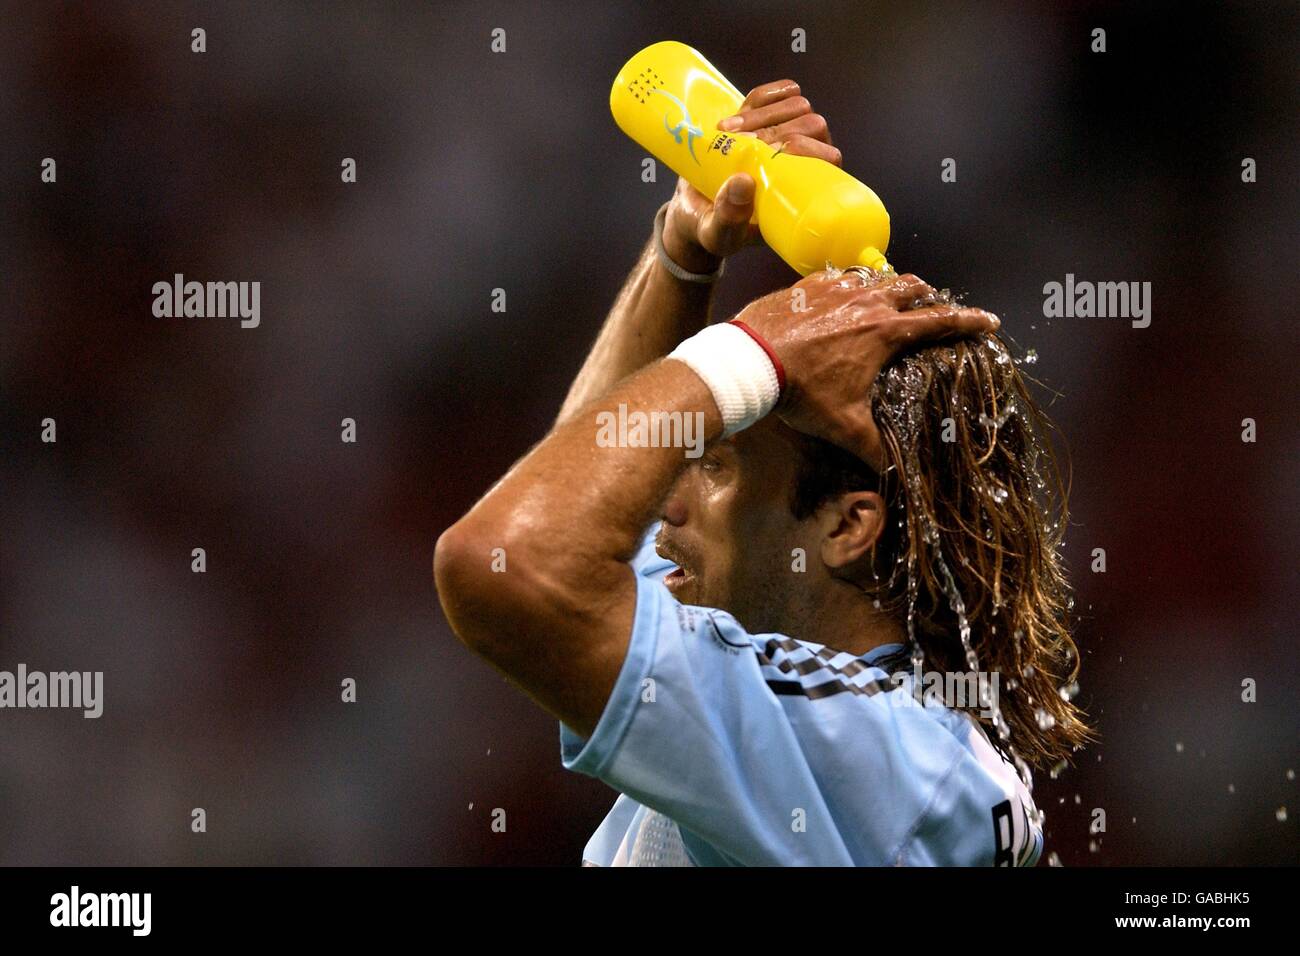 Soccer - FIFA World Cup 2002 - Group F - Argentina v England. Argentina's Gabriel Batistuta takes a break from the action Stock Photo